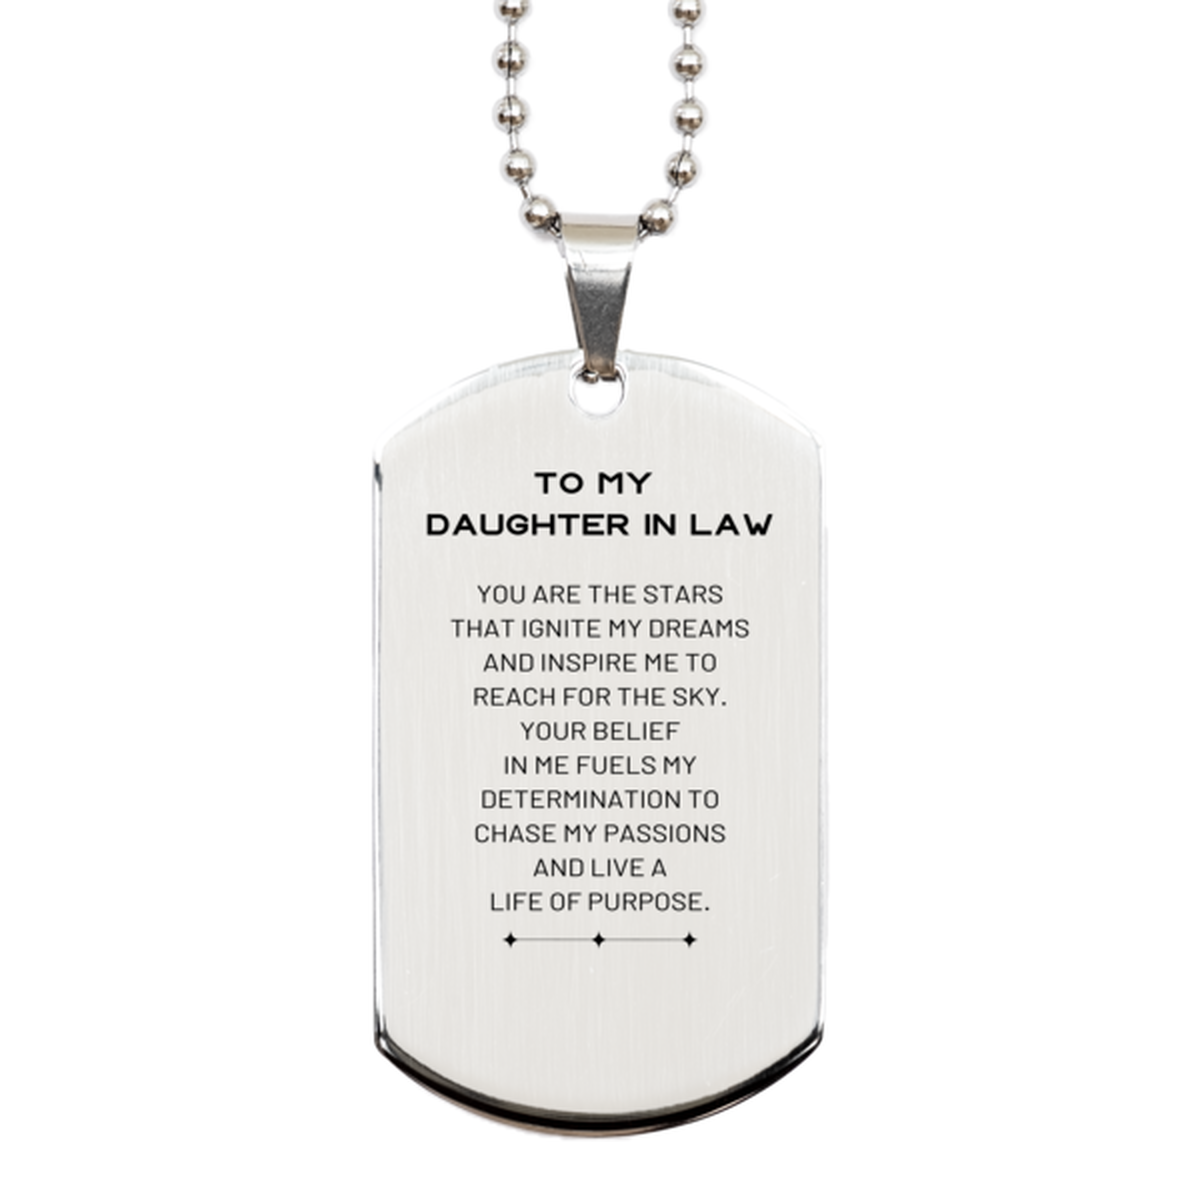 To My Daughter In Law Silver Dog Tag, You are the stars that ignite my dreams and inspire me to reach for the sky, Birthday Unique Gifts For Daughter In Law, Thank You Gifts For Daughter In Law